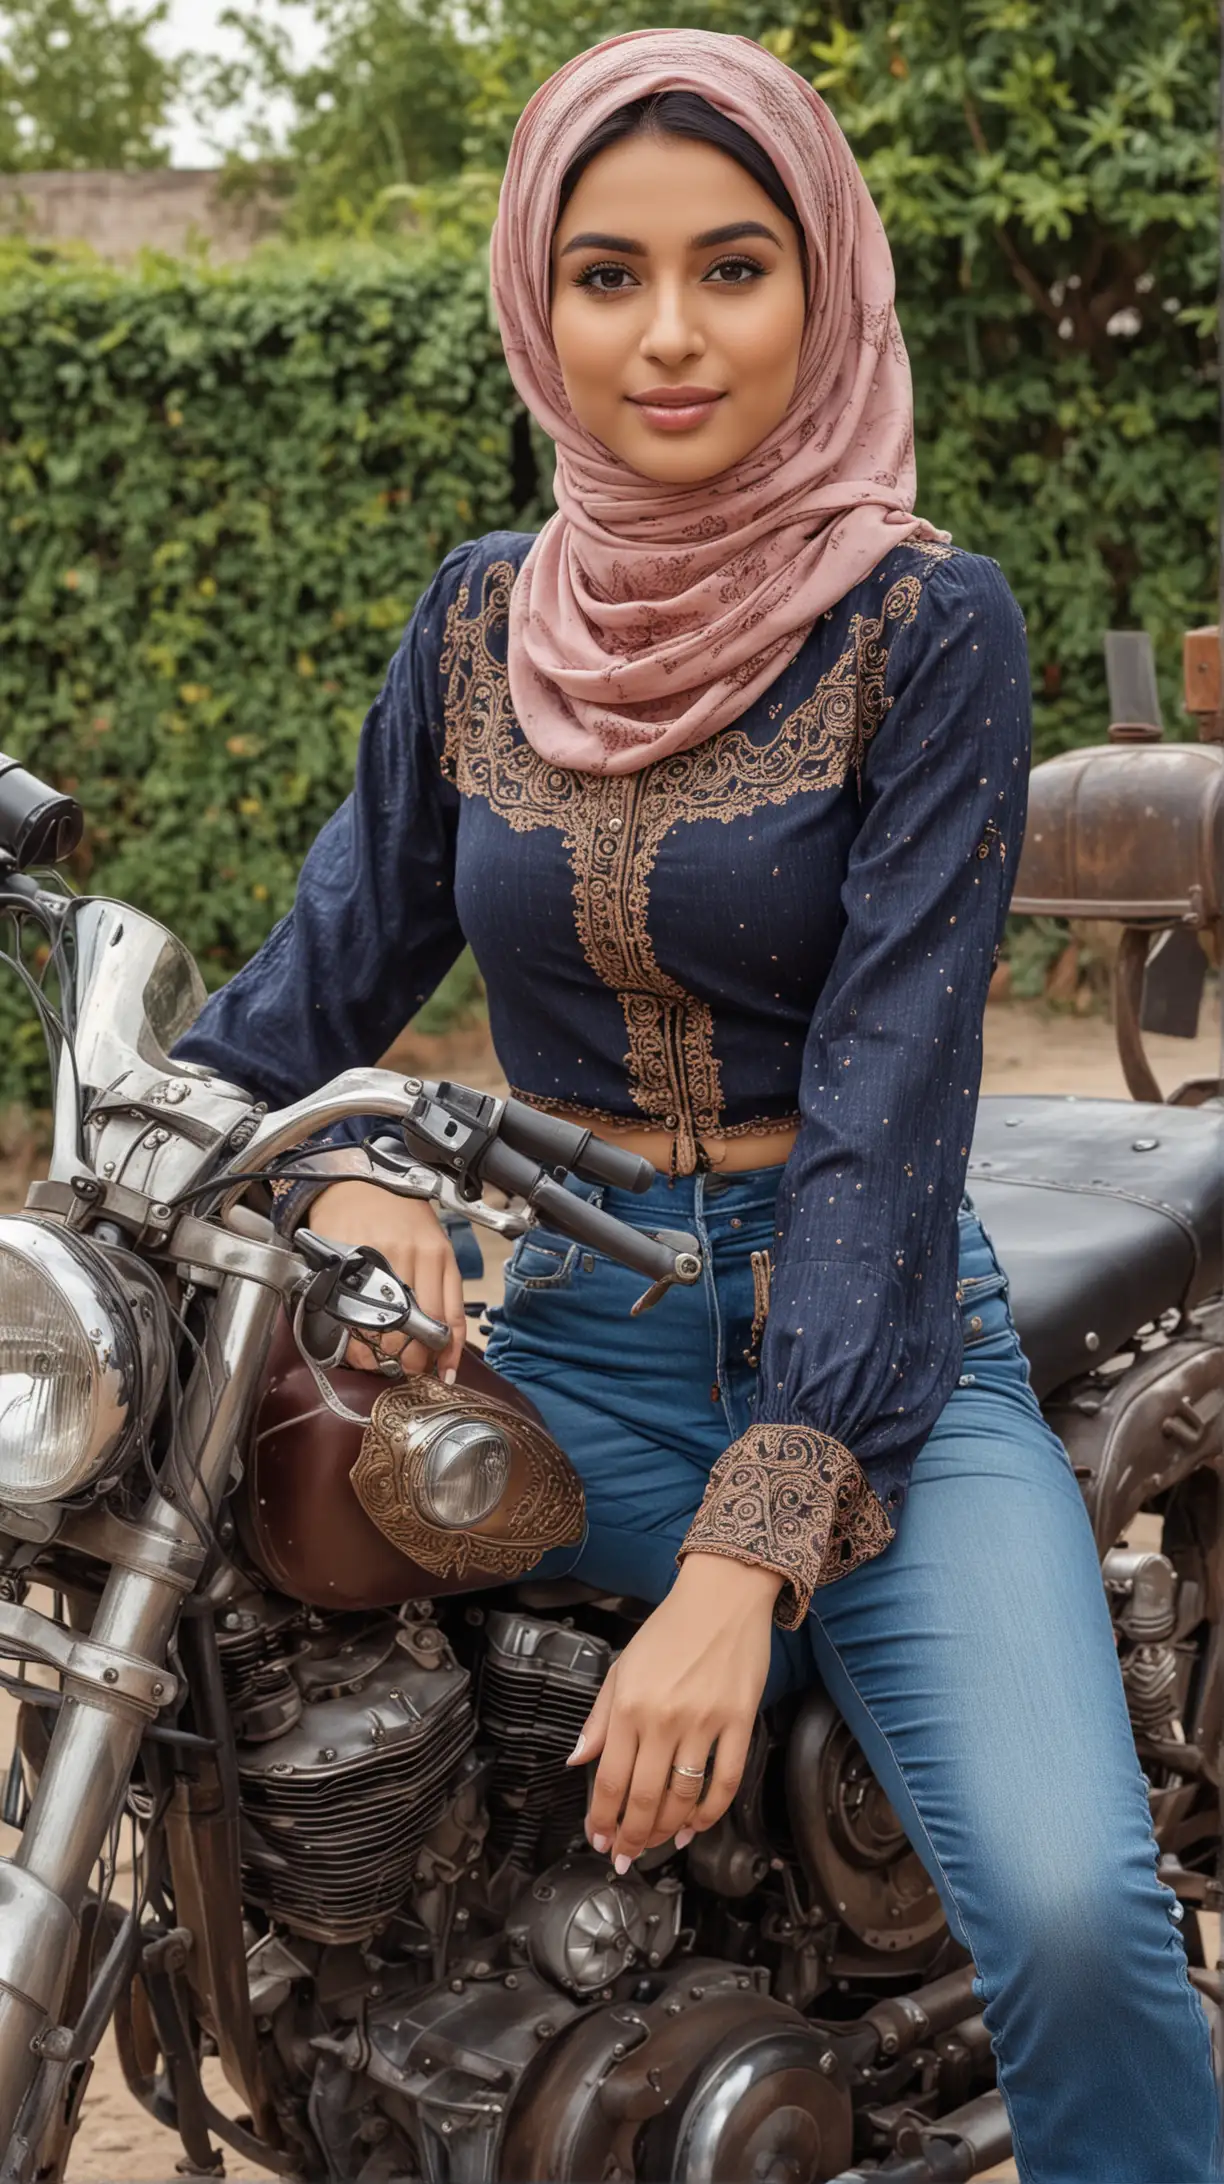 Stylish Woman in Hijab Poses on Vintage Motorcycle